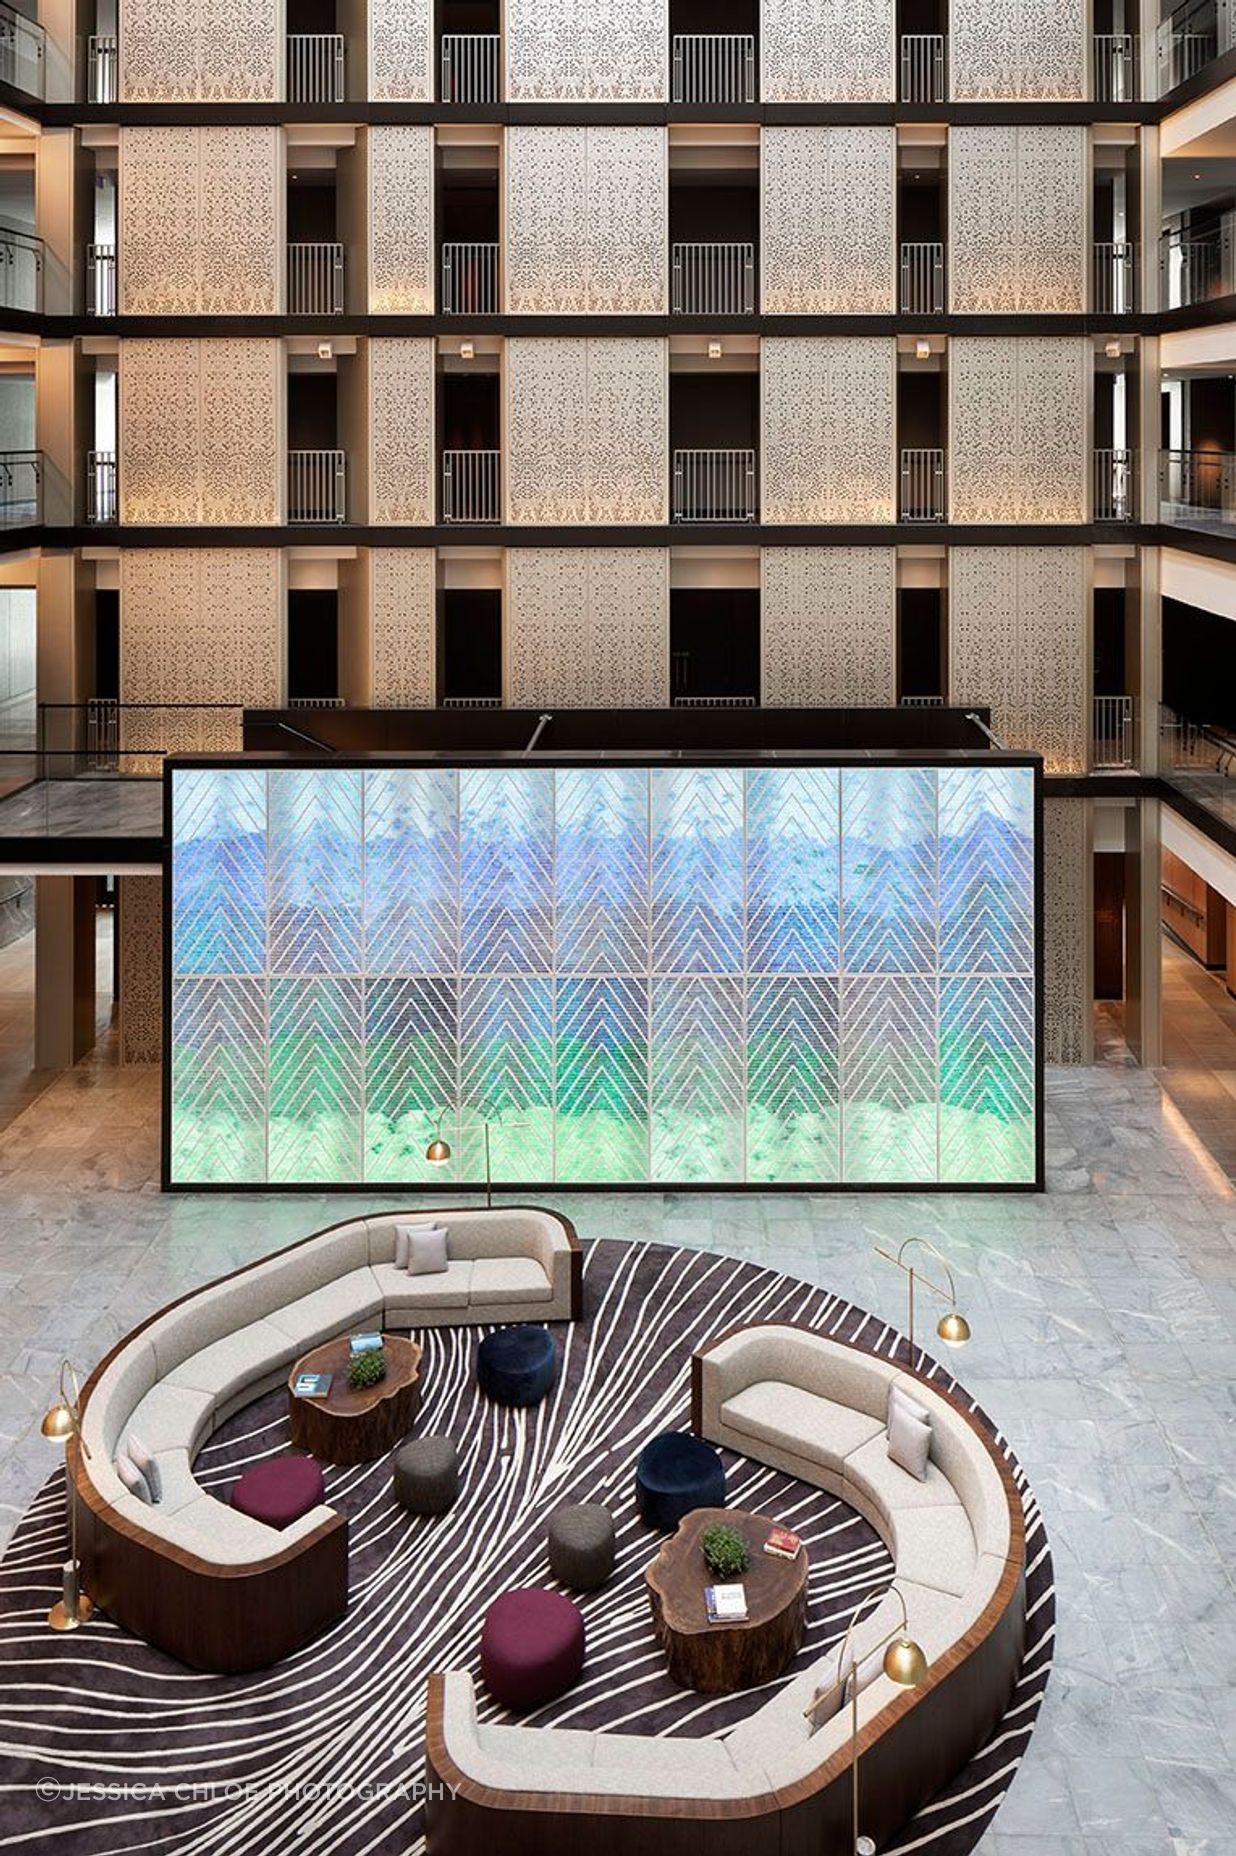 Lobby offers art and awe in scale of the space